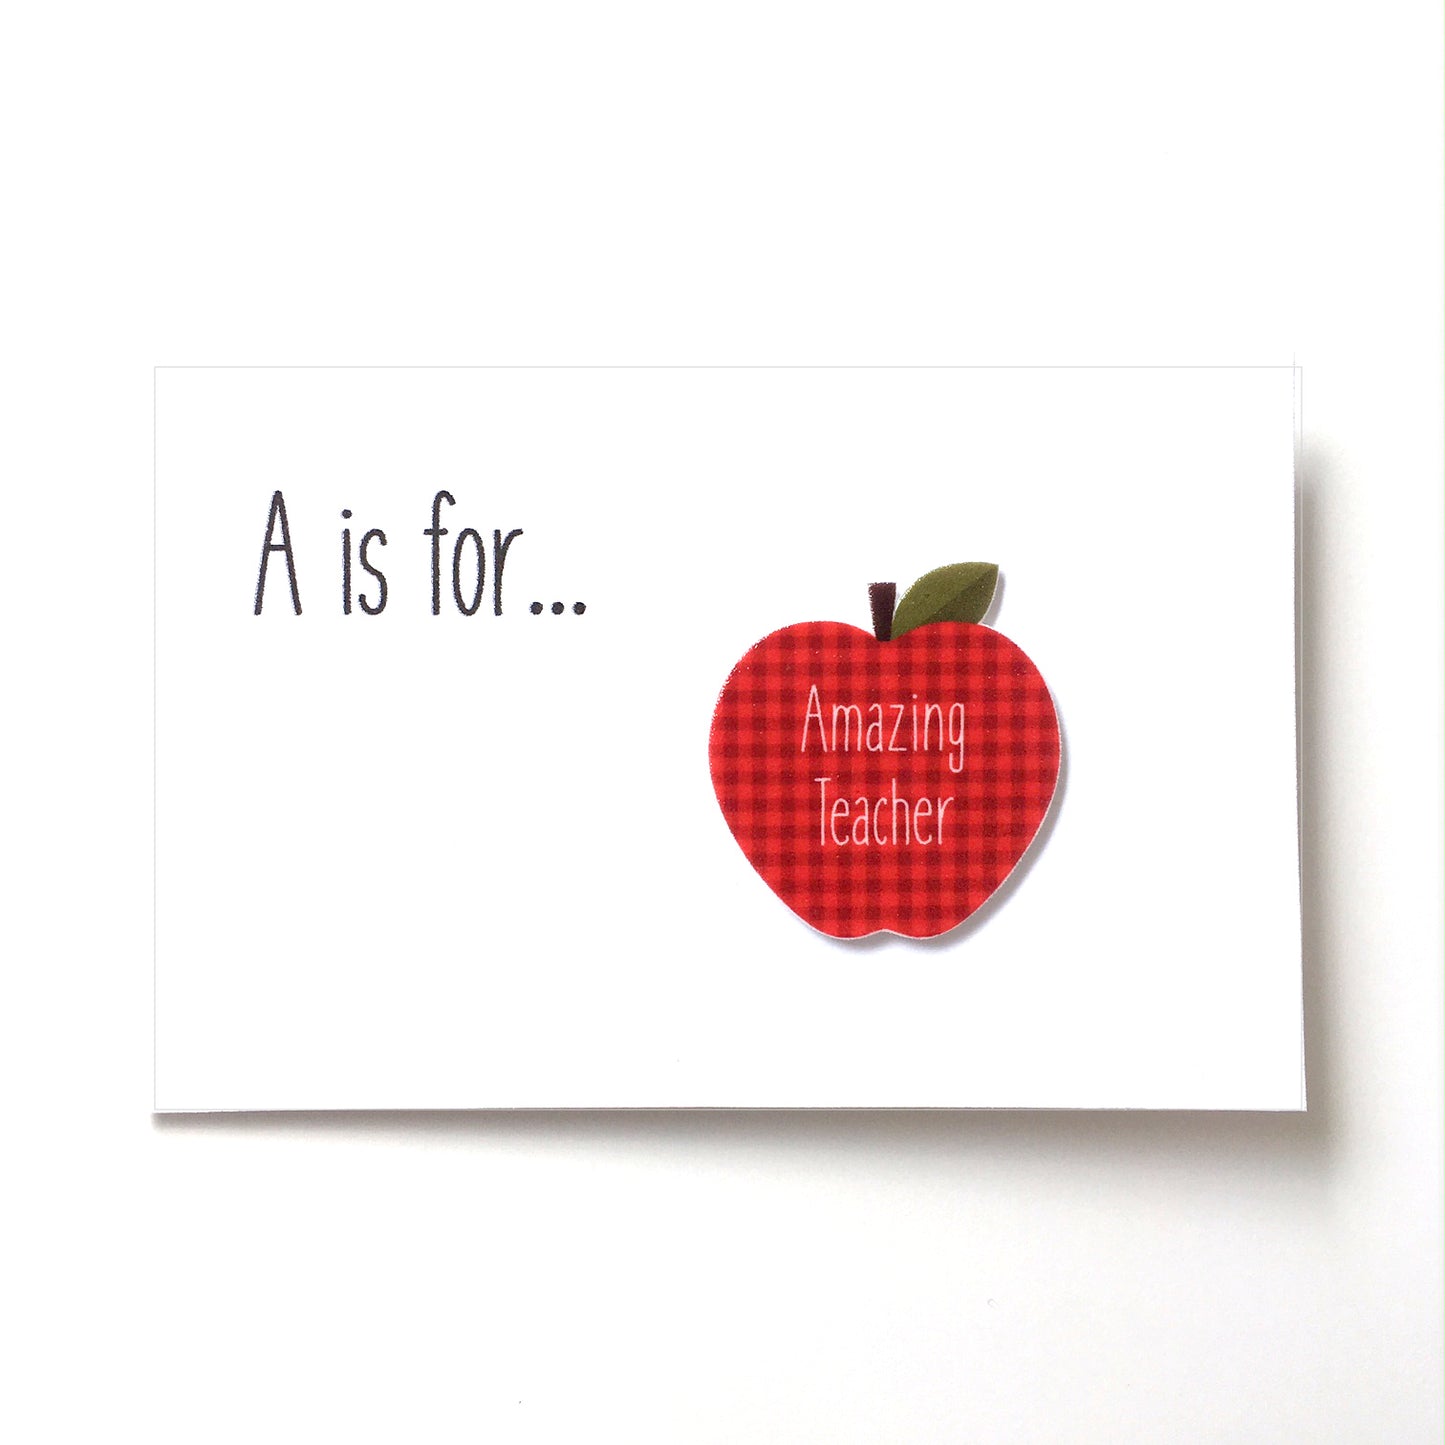 Amazing teacher lanyard pin - A is for apple